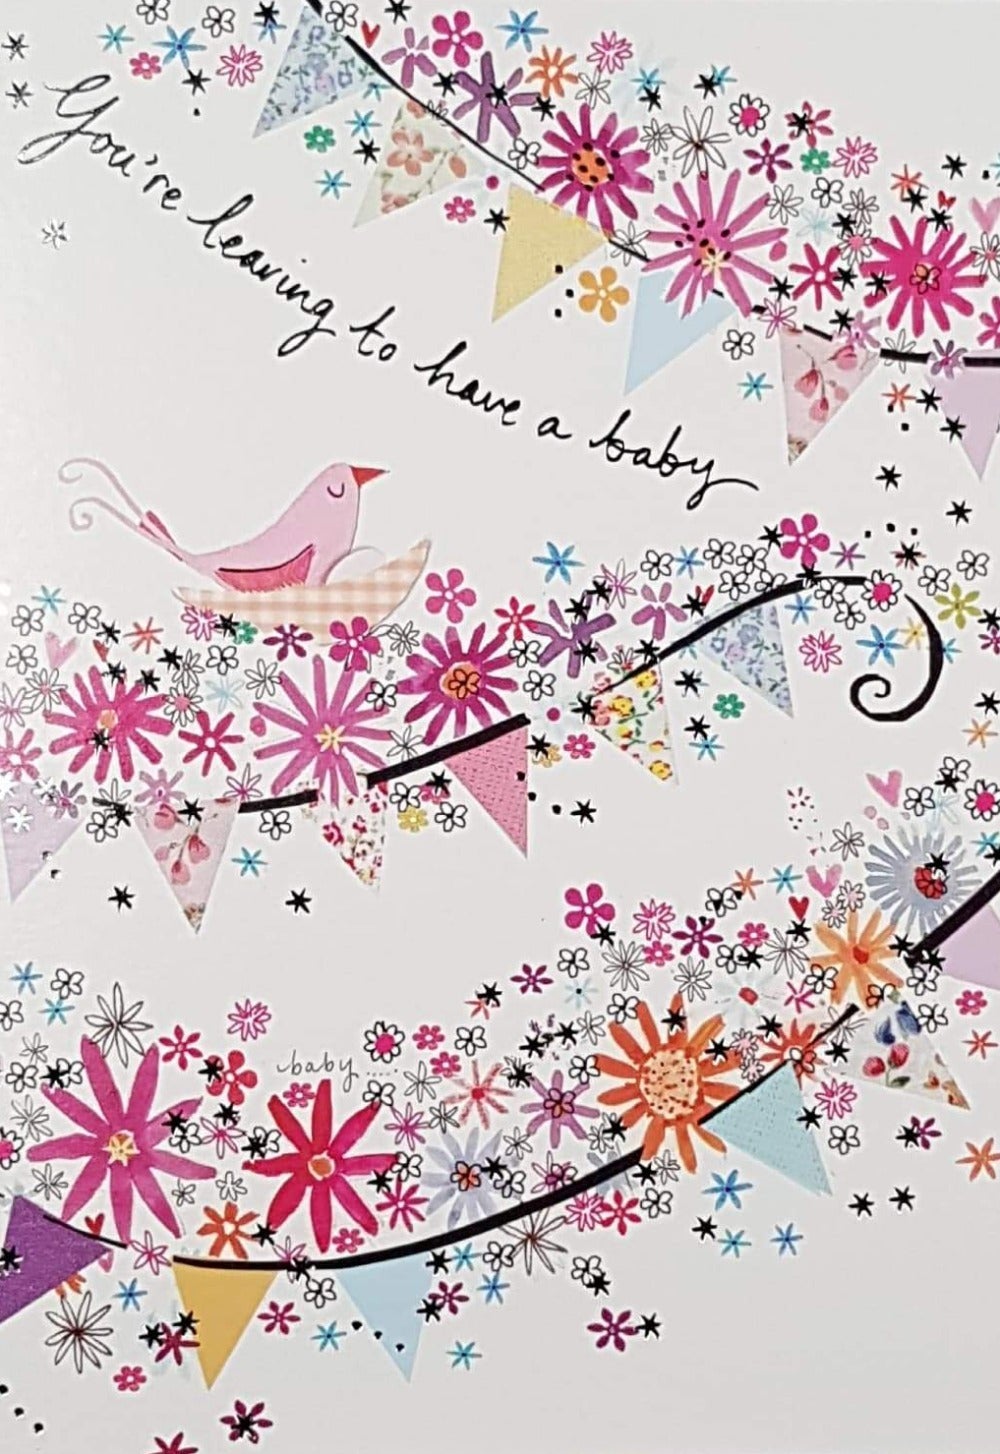 New Baby Card - General / You're Leaving To Have A Baby & Little Pink Bird In The Nest